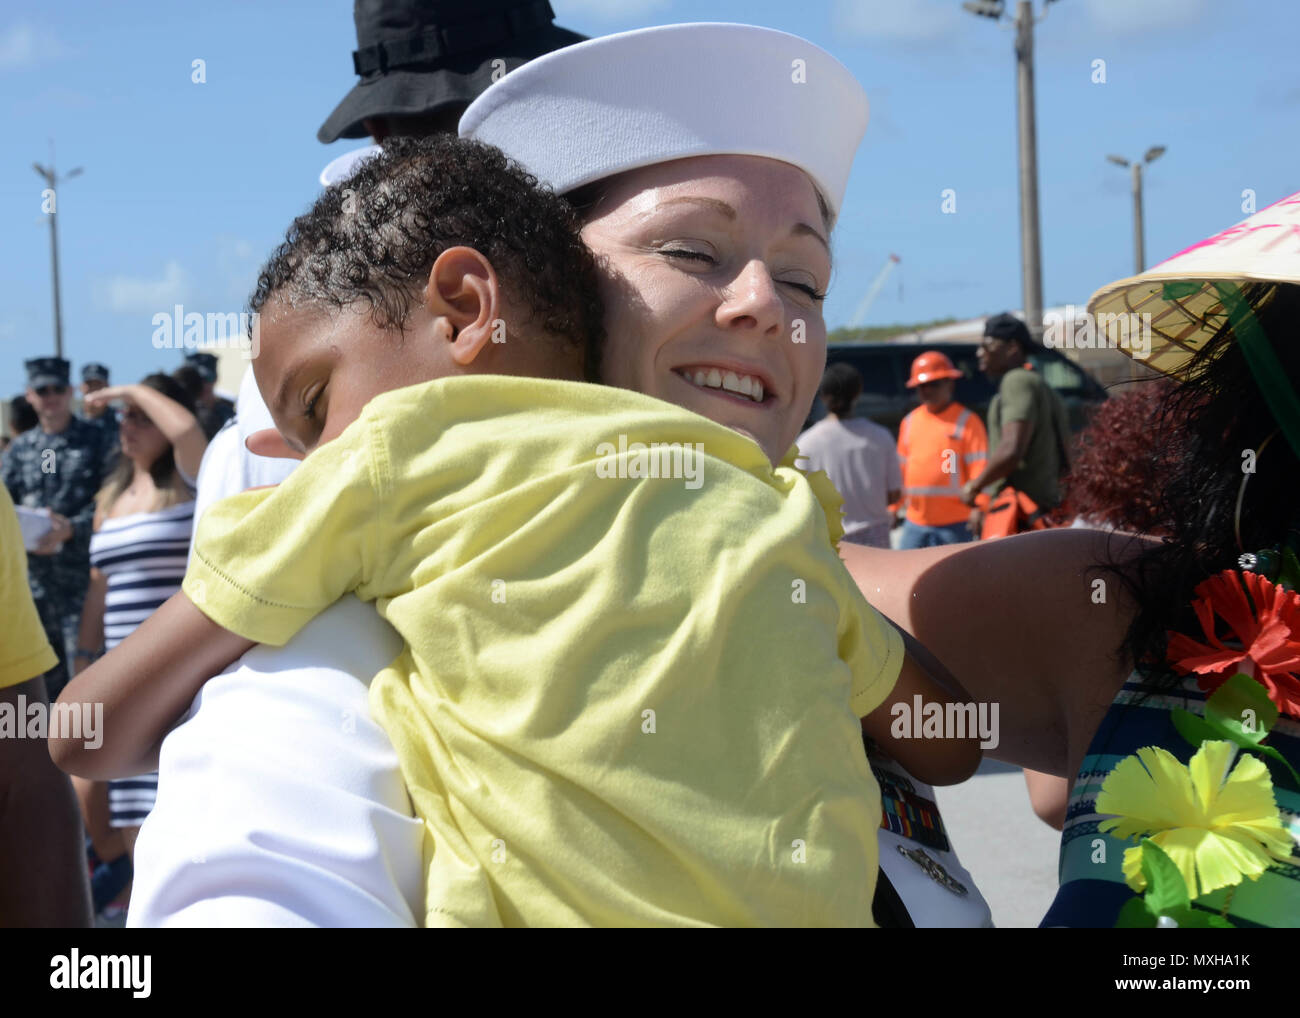 161108-N-WA347-113 SANTA RITA, Guam (Nov. 8, 2016) – Petty Officer 2nd Class Sarah Martindale, native of Owensboro, Ky., assigned to the submarine tender USS Frank Cable (AS 40), is reunited with her son on the pier at Naval Base Guam after completing a five-month deployment, Nov. 8.  Frank Cable departed Guam June 6, was a persistent presence throughout the Indo-Asia-Pacific region during its deployment providing vital flexibility to the fleet commanders, extending the range and impact of U.S. naval forces in the U.S. Navy’s 5th and 7th Fleets.  Forward deployed to Guam, Frank Cable’s combine Stock Photo